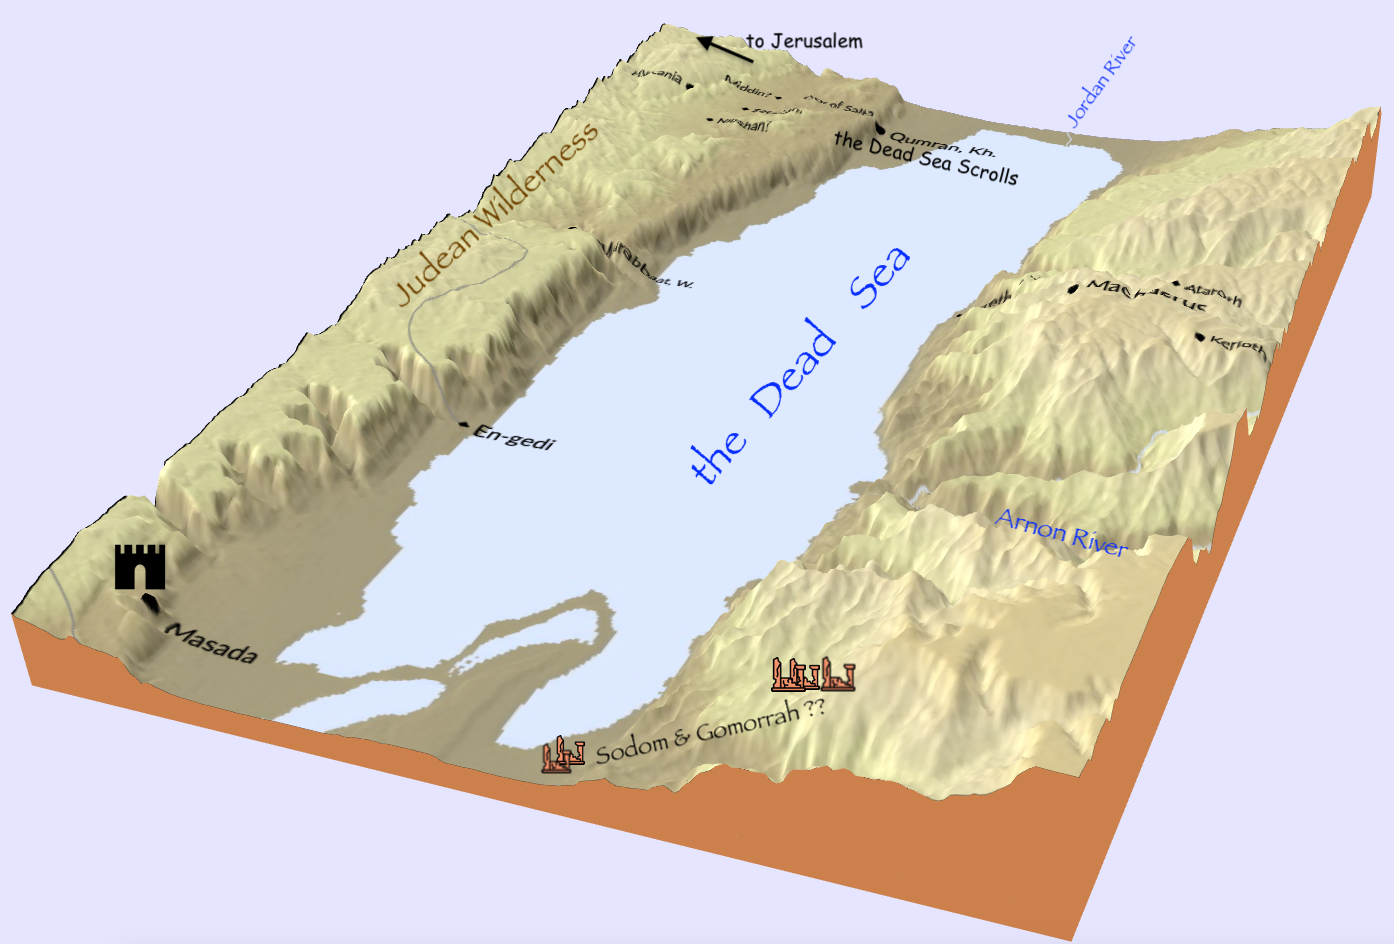 Map of the Dead Sea & surrounding geography.